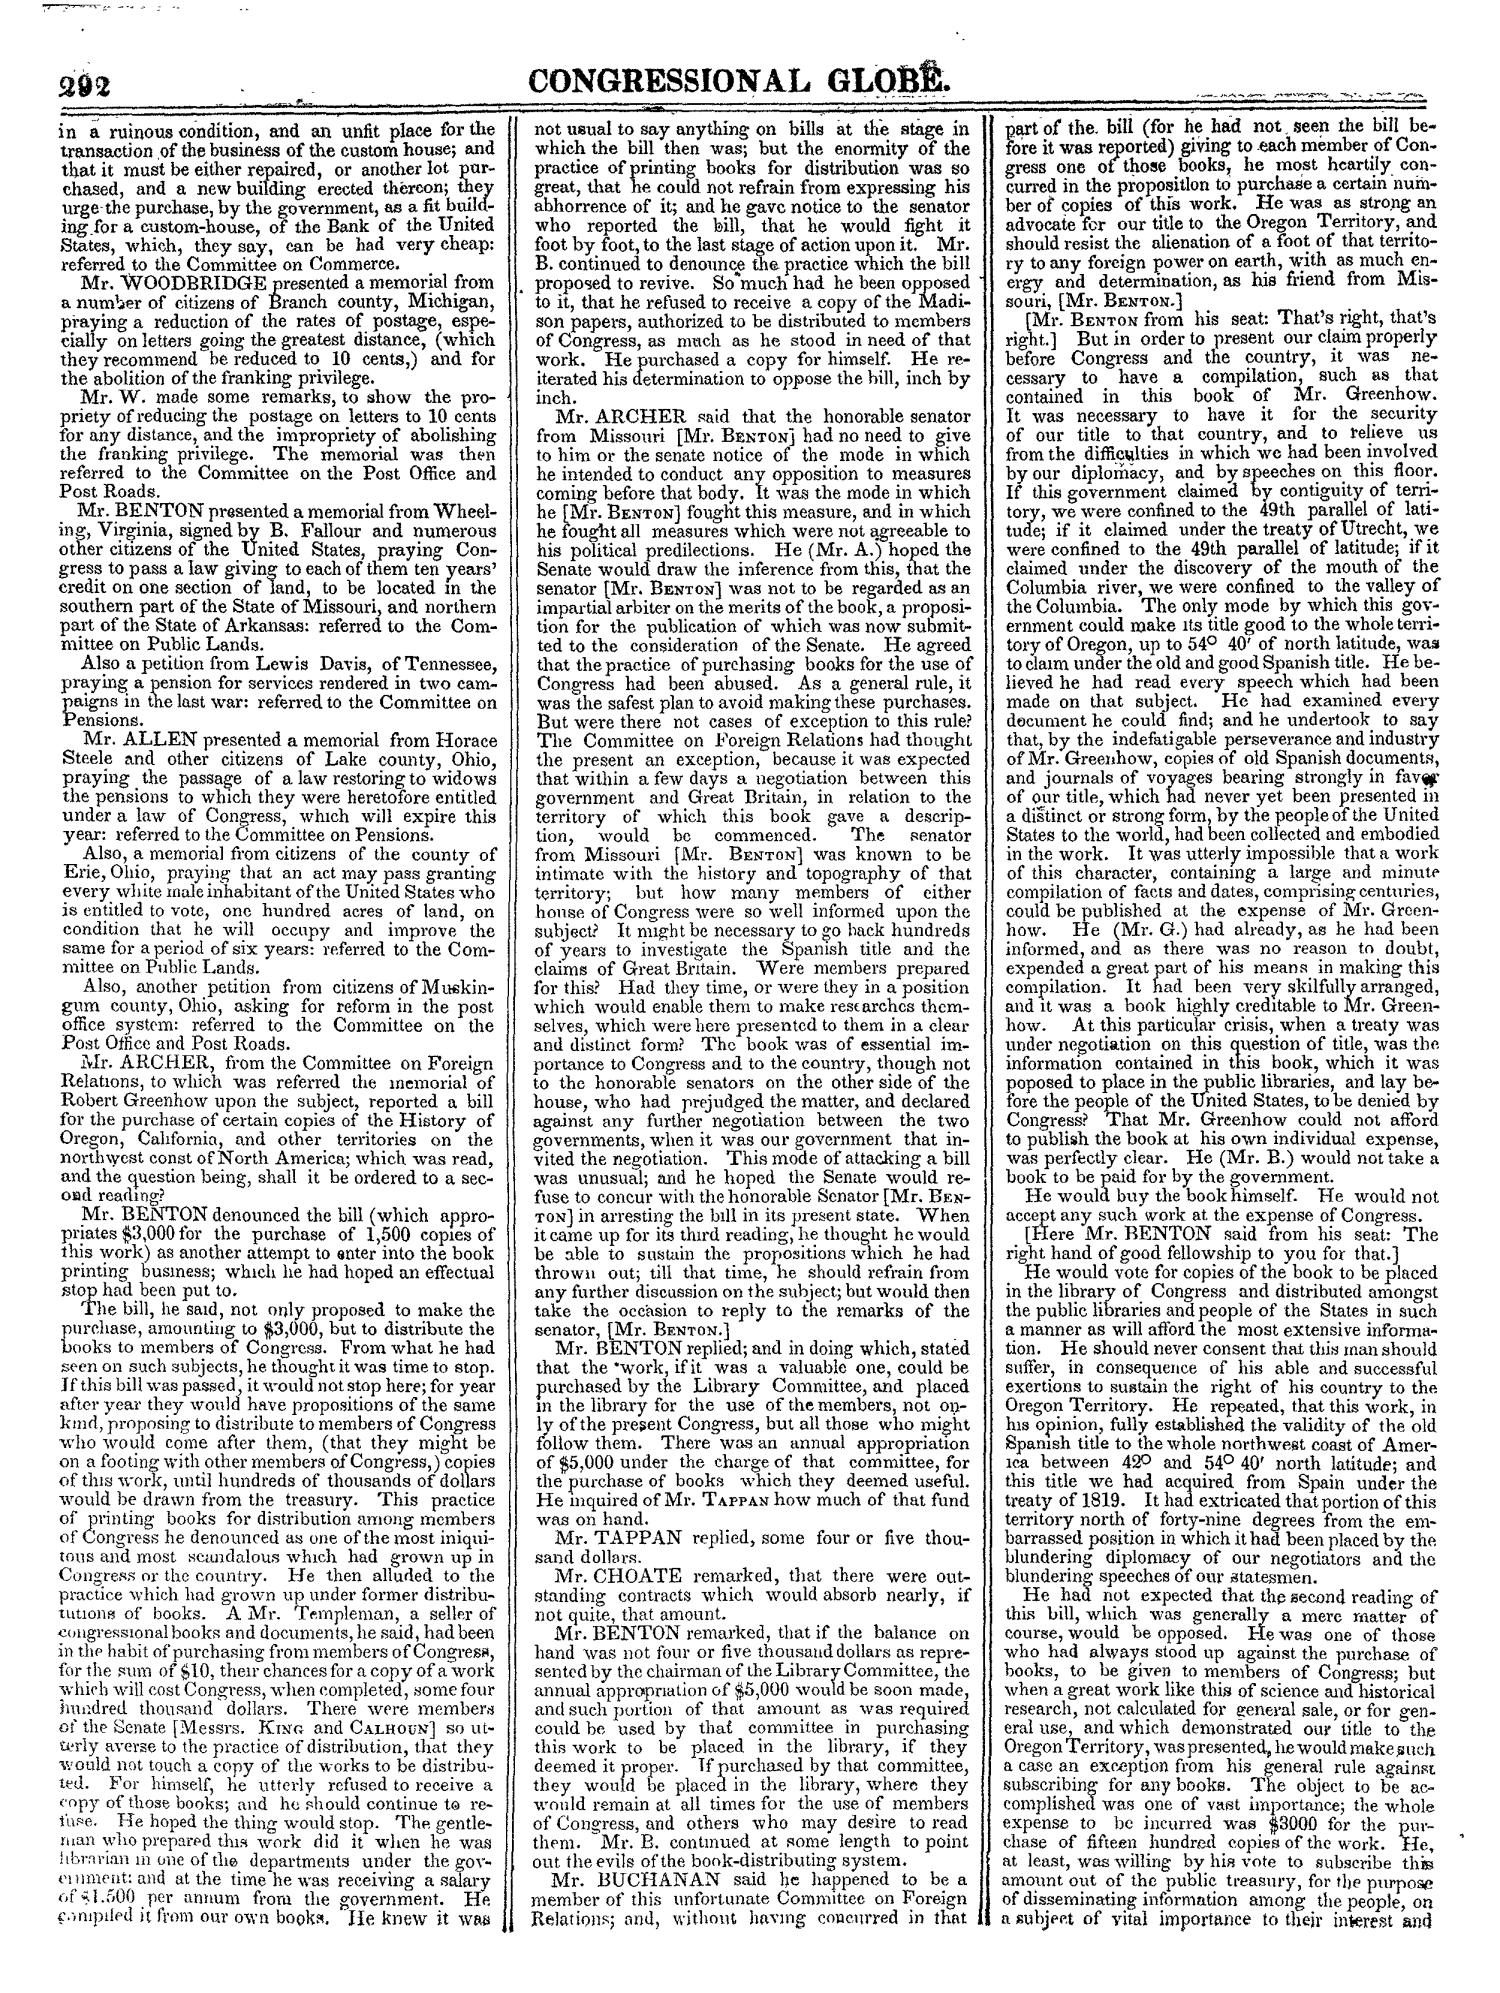 The Congressional Globe, Volume 13, Part 1: Twenty-Eighth Congress, First Session
                                                
                                                    292
                                                